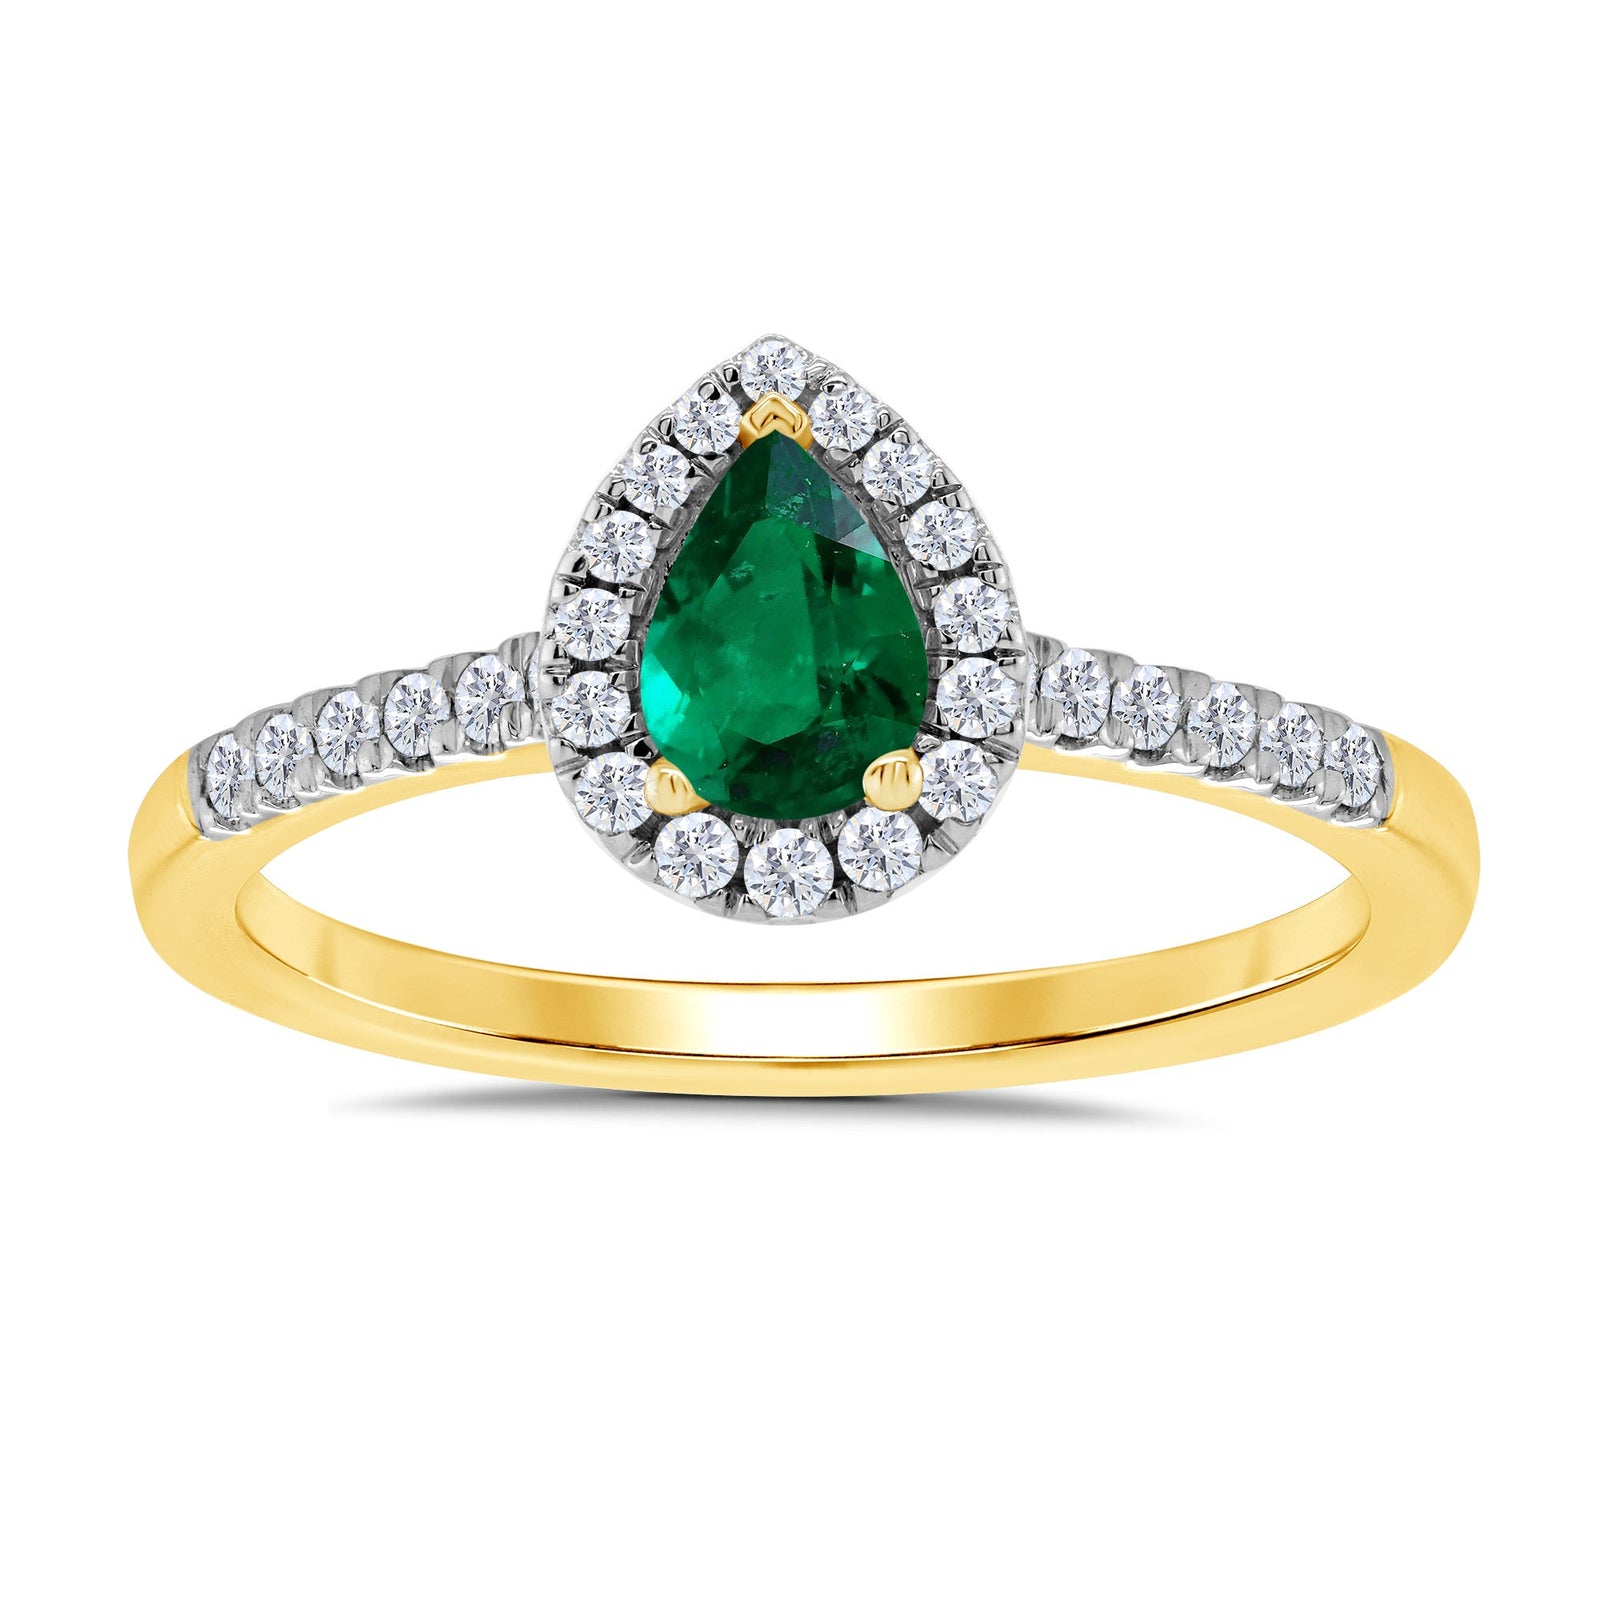 9ct gold 6x4mm pear shape emerald & diamond cluster ring with diamond set shoulders 0.20ct